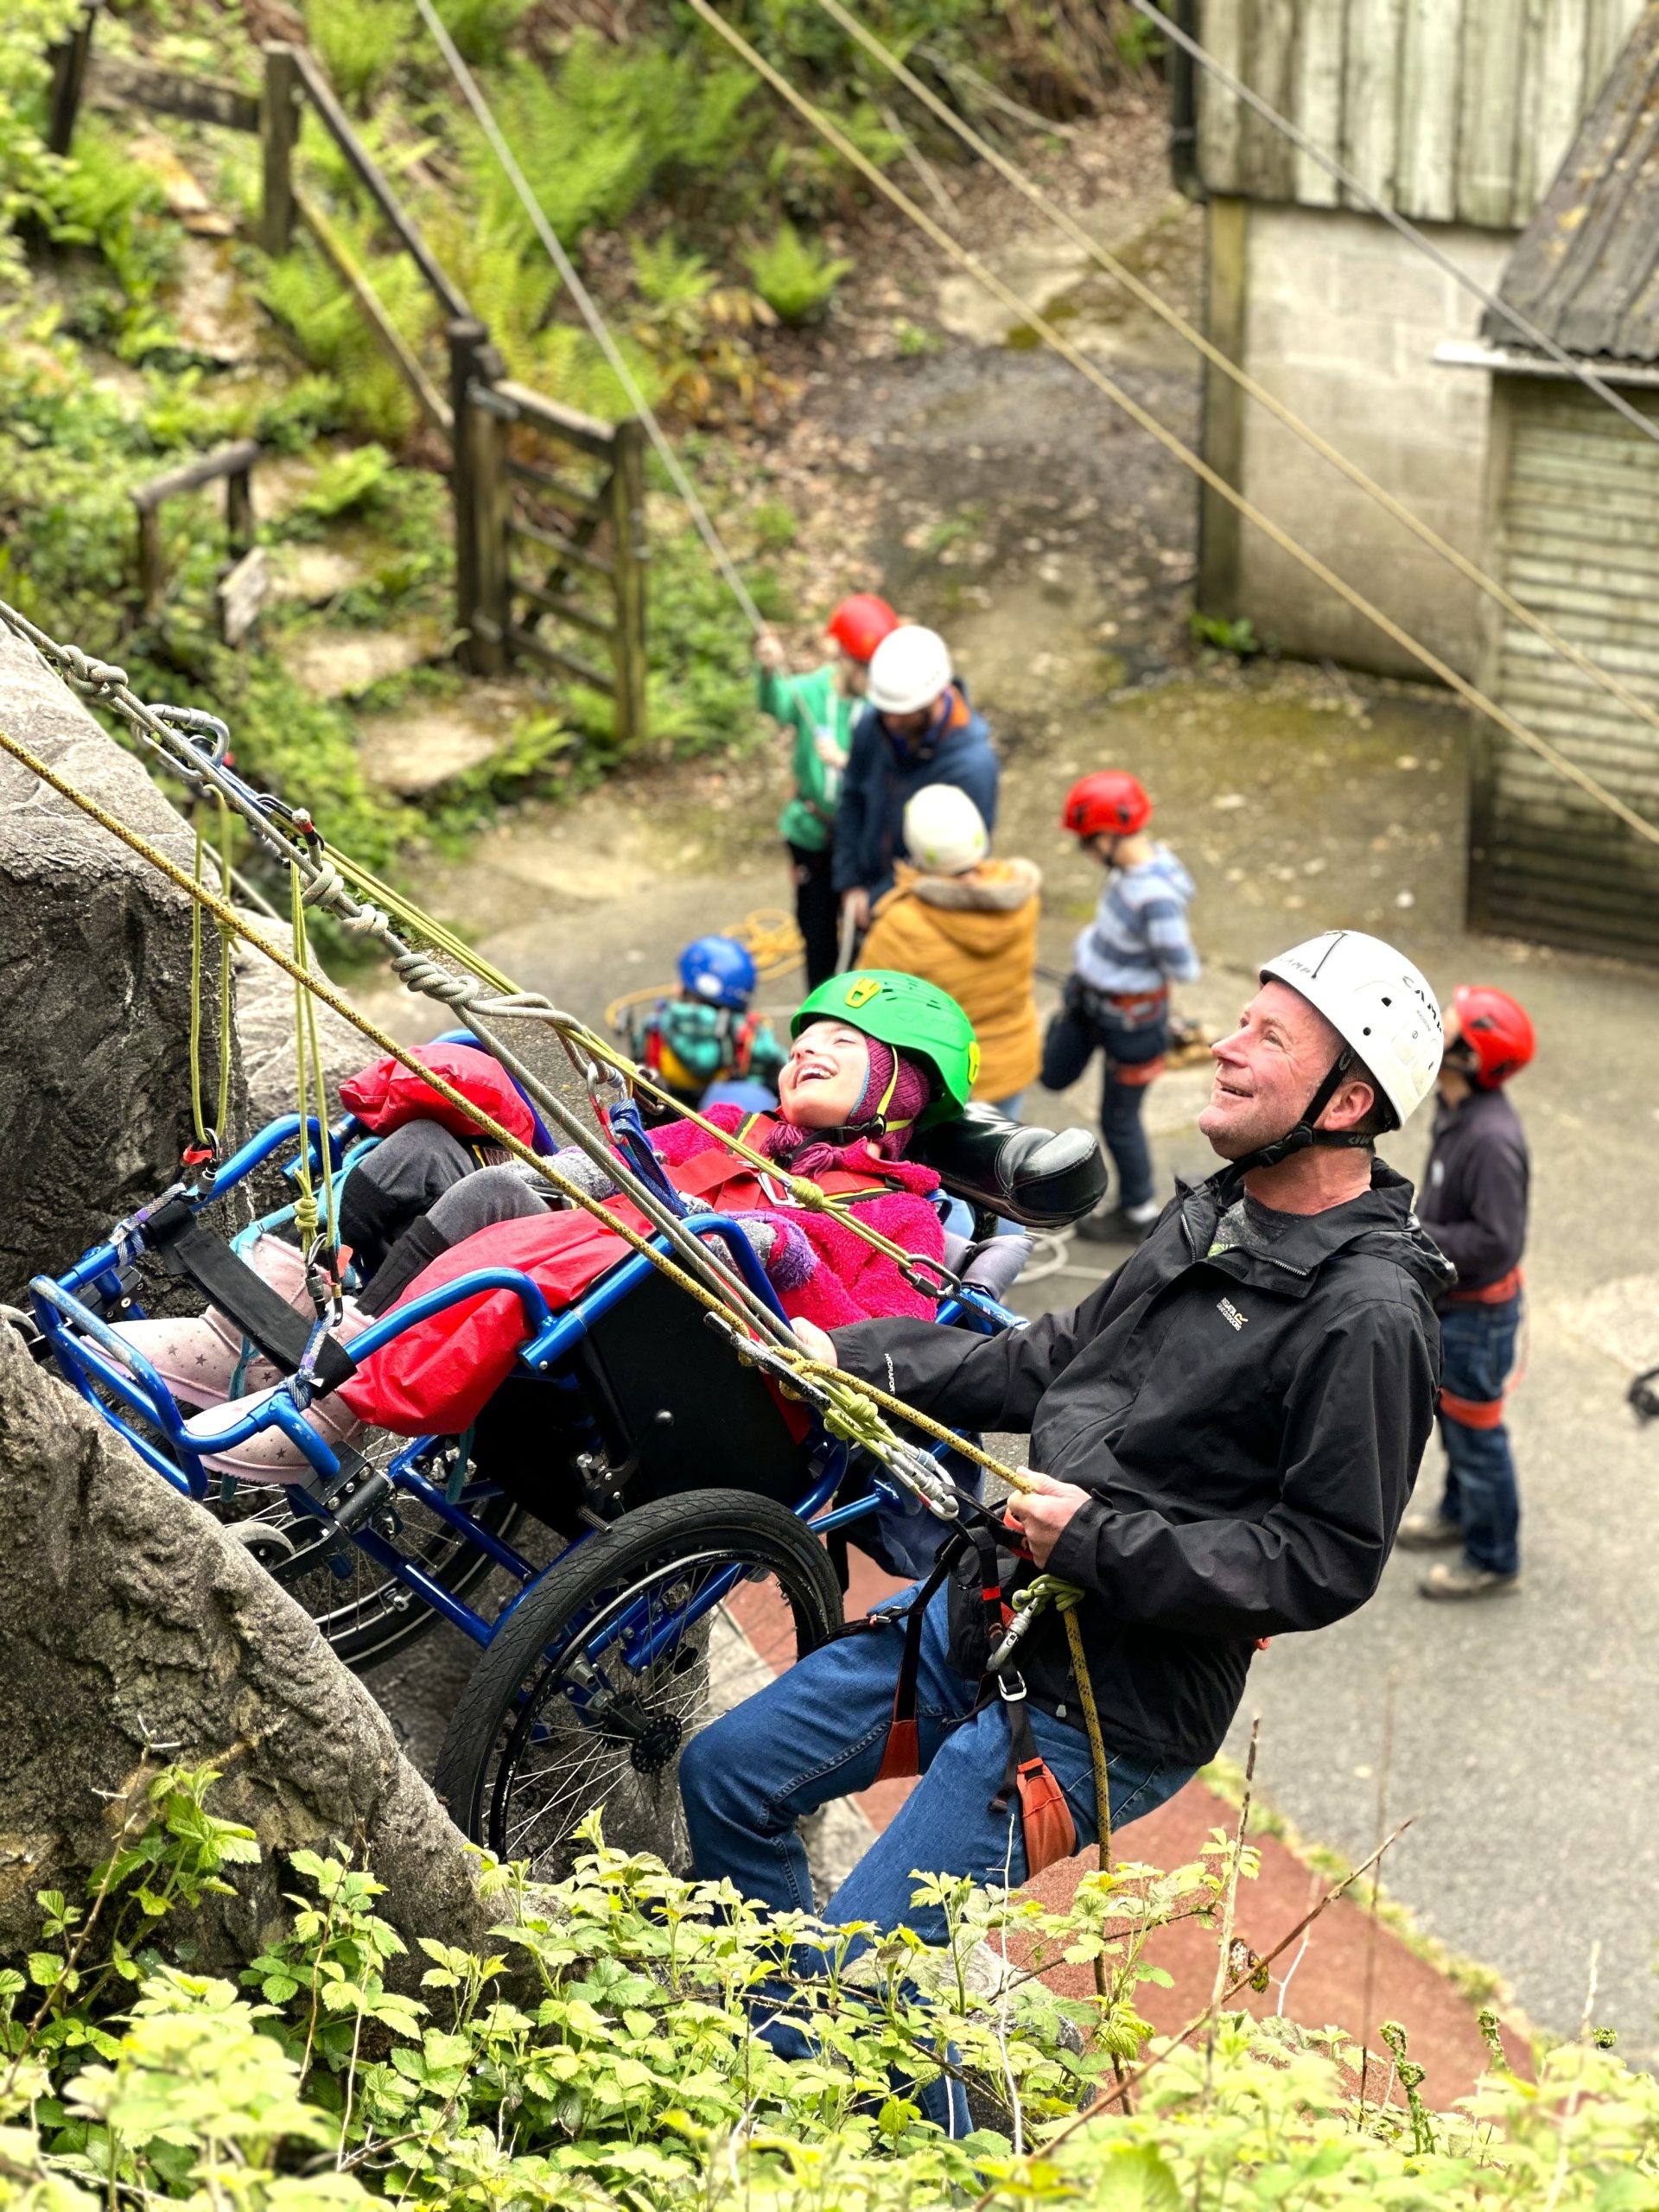 Two guests side by side on the abseil wall, one is in a wheelchair and the other is standing by her side and they are both smiling and looking up to the top of the wall. They are attached into a rope system and there are people blurred out in the background at the bottom of the climbing wall.